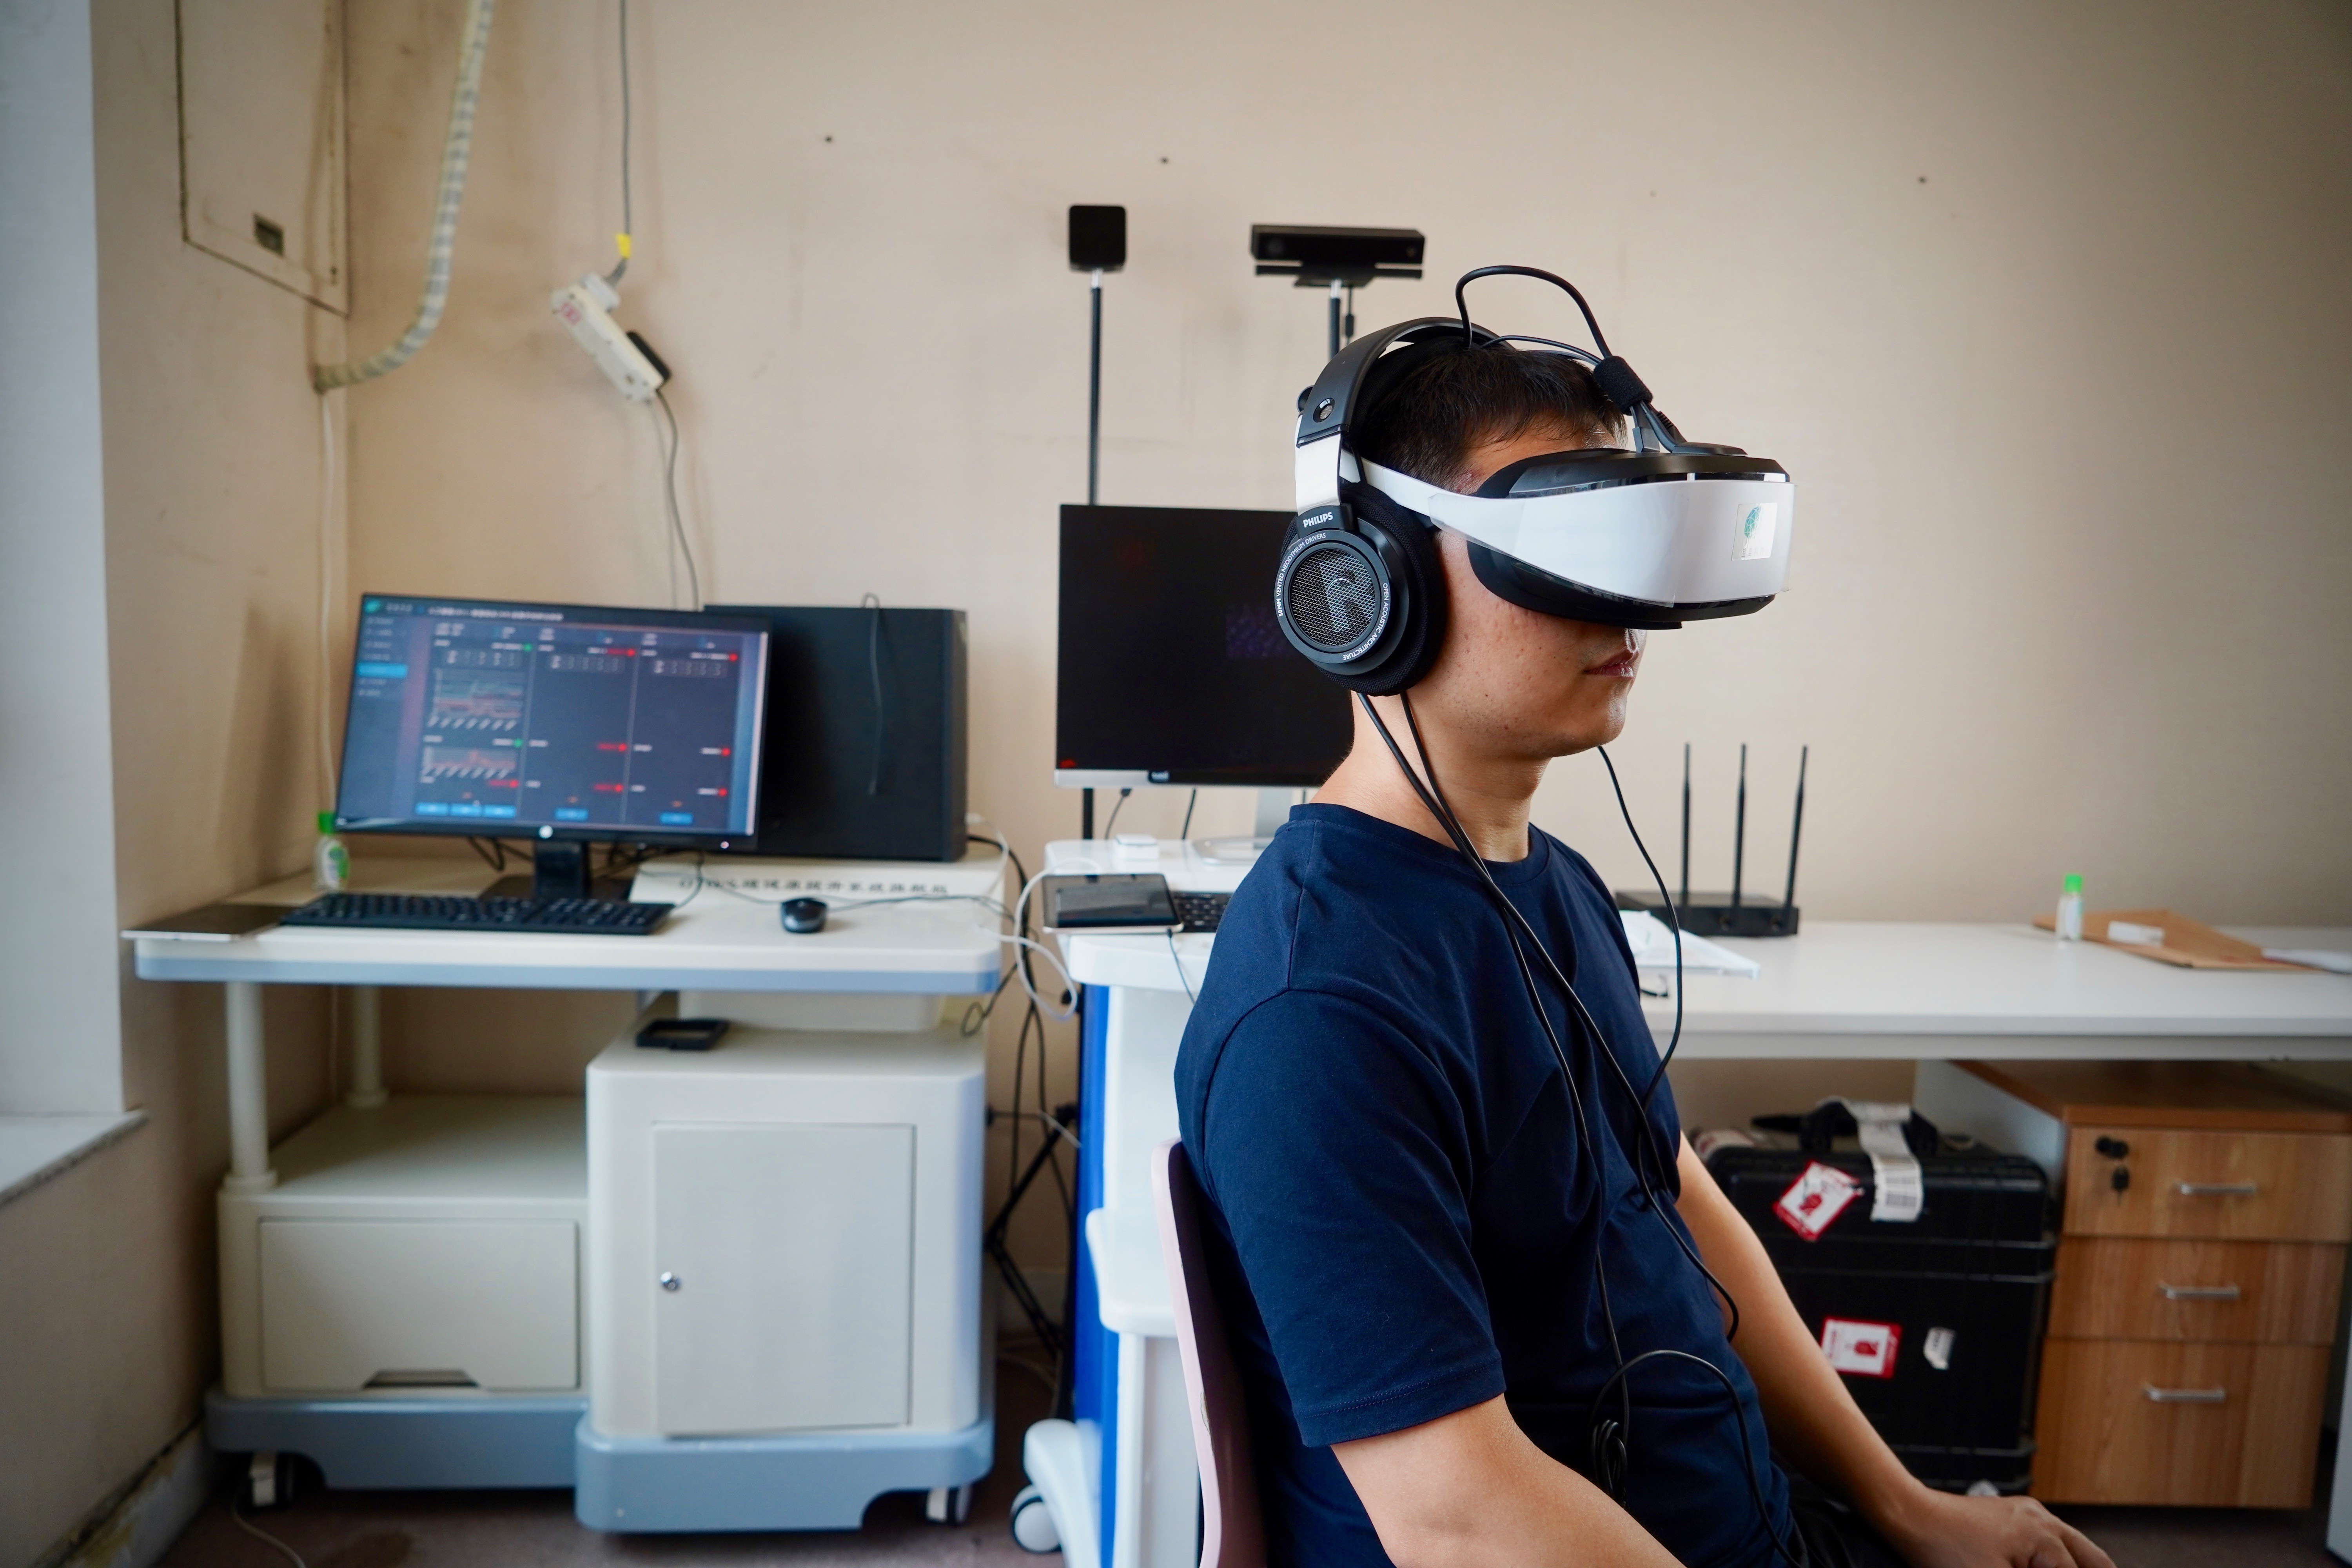 The WonderLab algorithm tracks the brain’s reaction to certain drug abuse simulation scenes in the VR experience. Photo: SCMP/Tom Wang